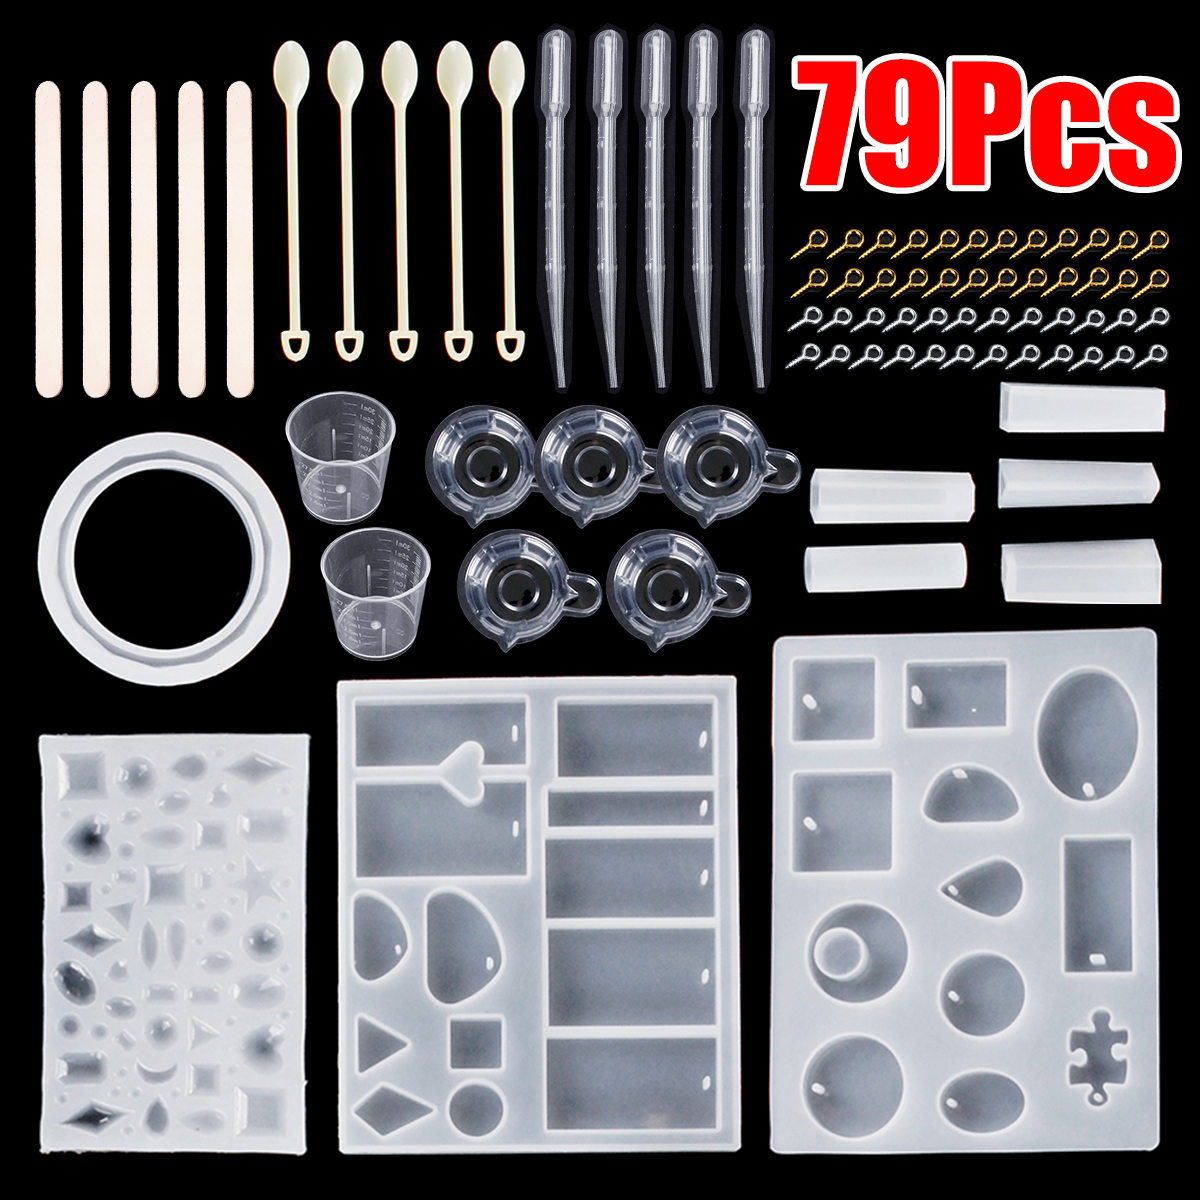 79Pcs-DIY-Creative-Crystal-Epoxy-Mould-Jewelry-Silicone-Accessories-Resin-Casting-Molds-1460810-1